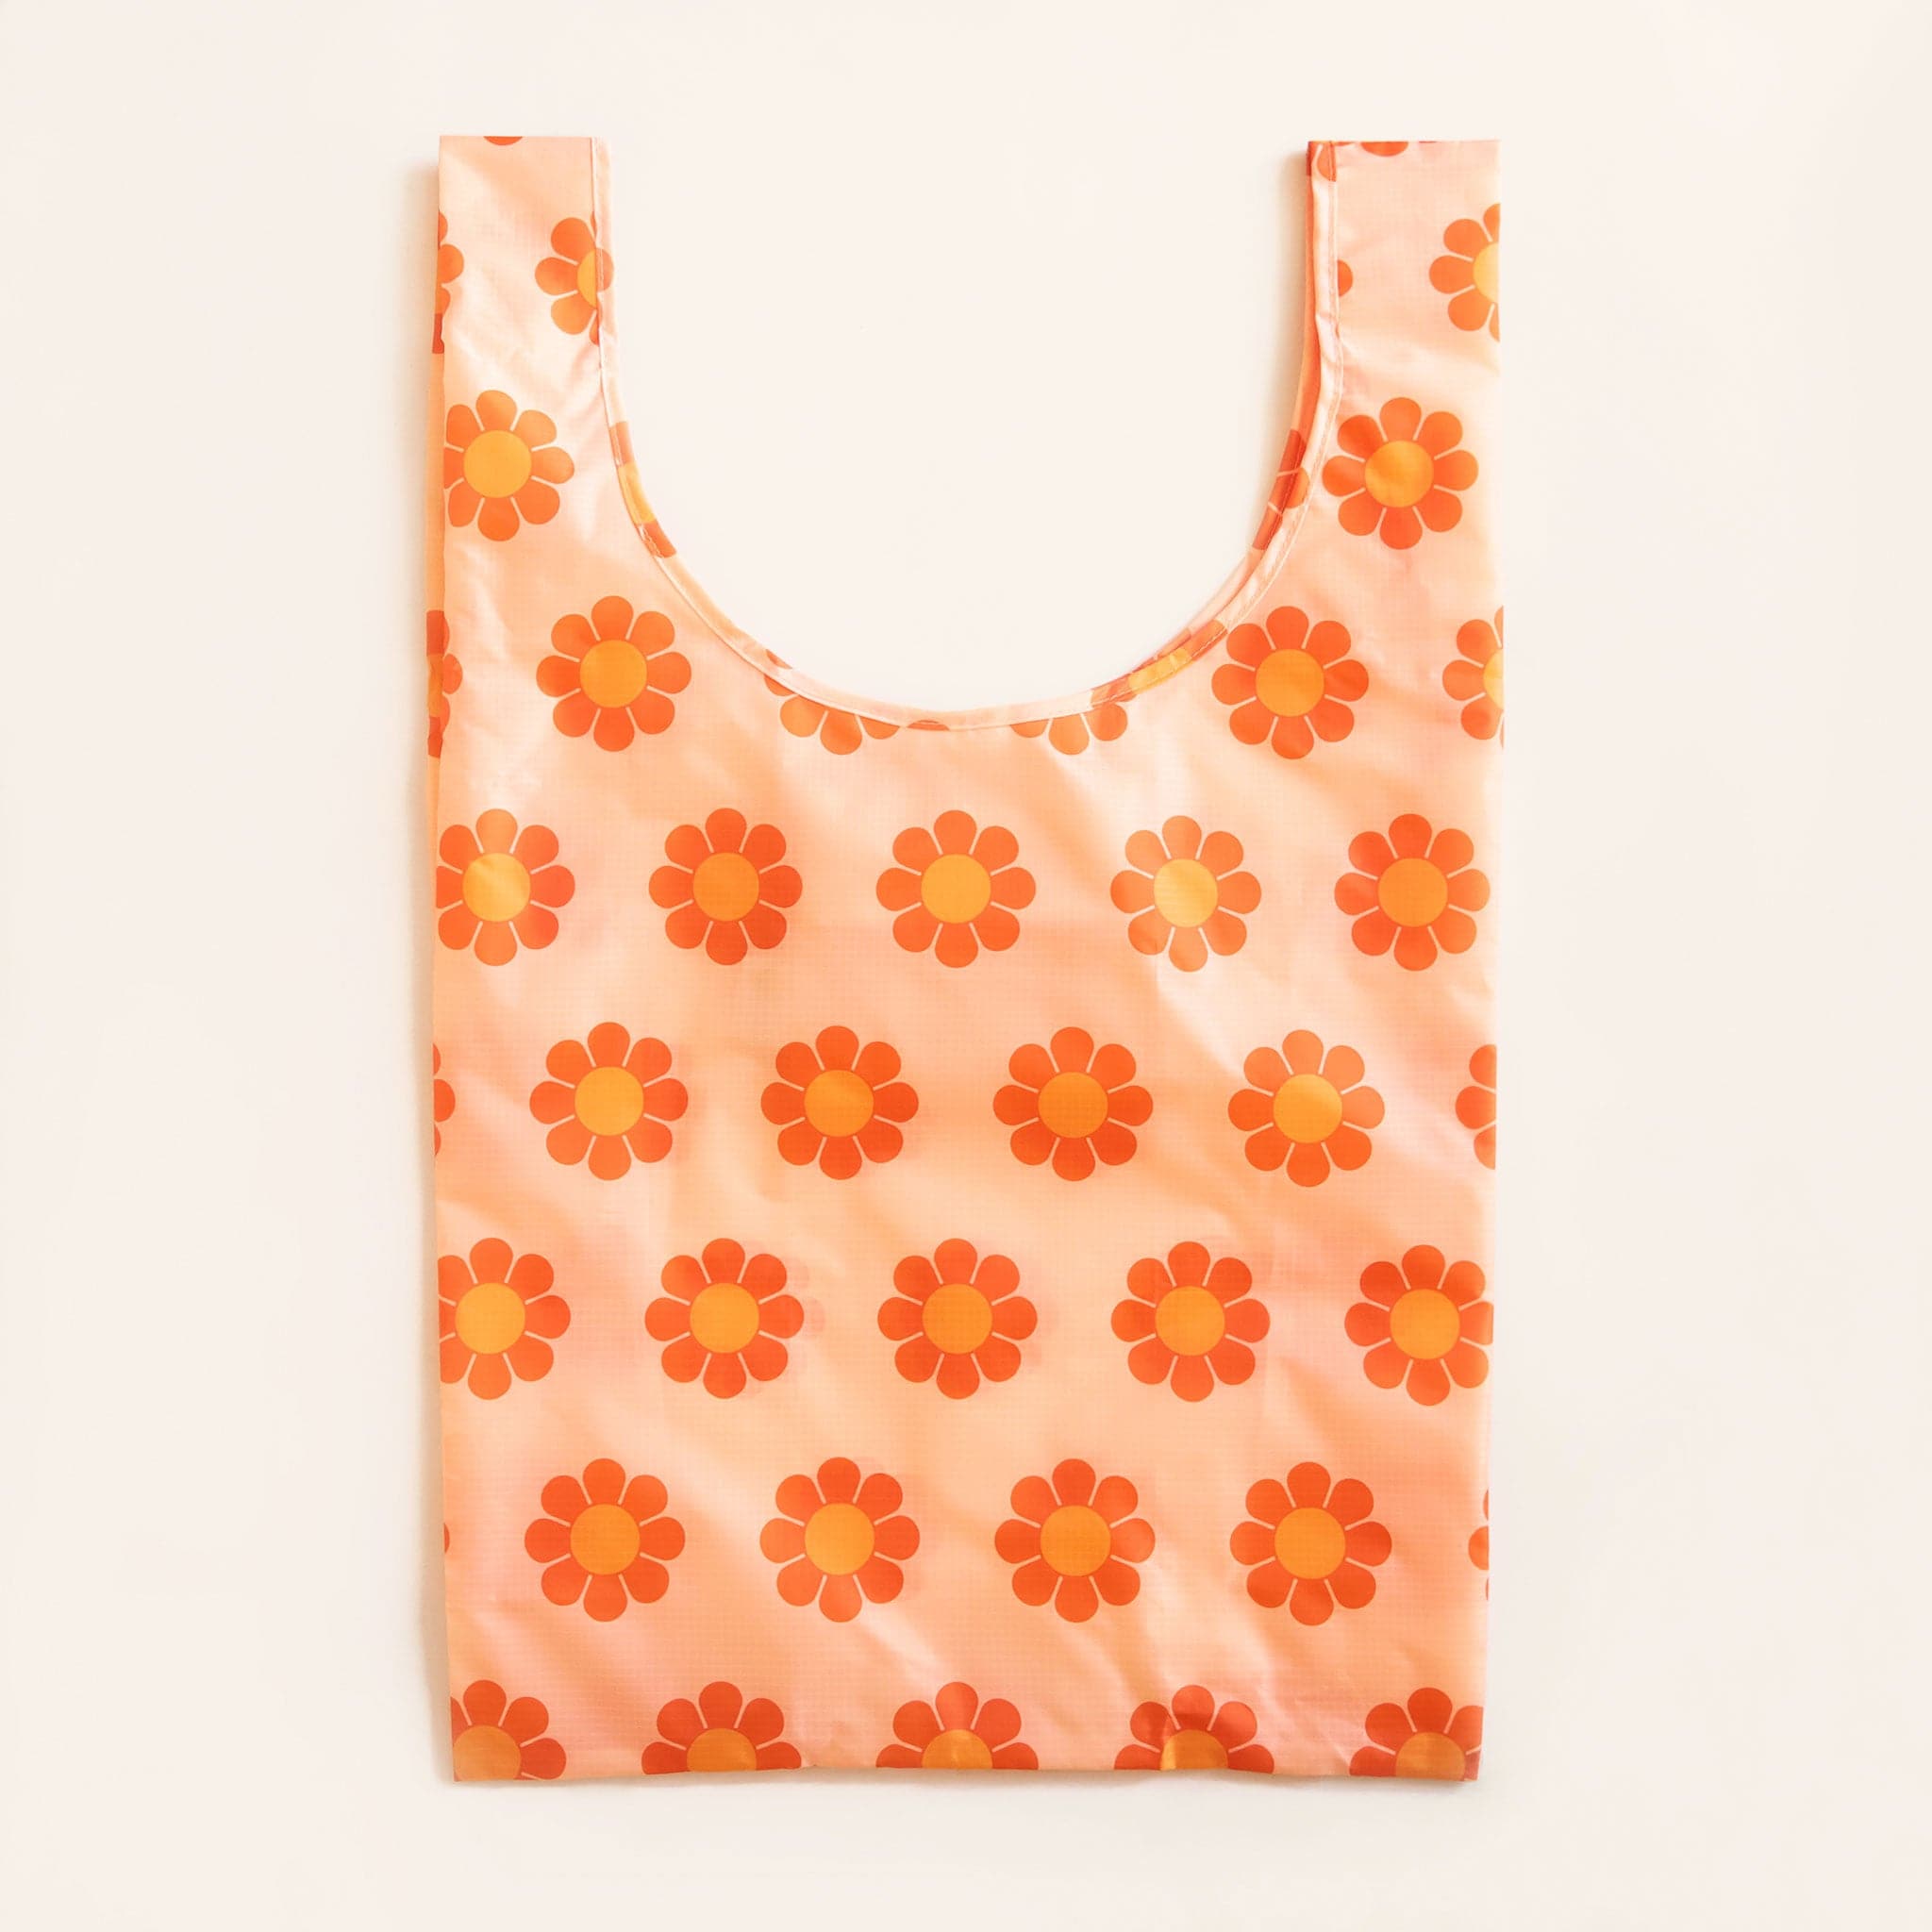 Peach reusable bag filled with a pattern of flowers with red-orange petals and tangerine centers. The bag is positioned flat on a table and has a &#39;U&#39; shape between two handles.